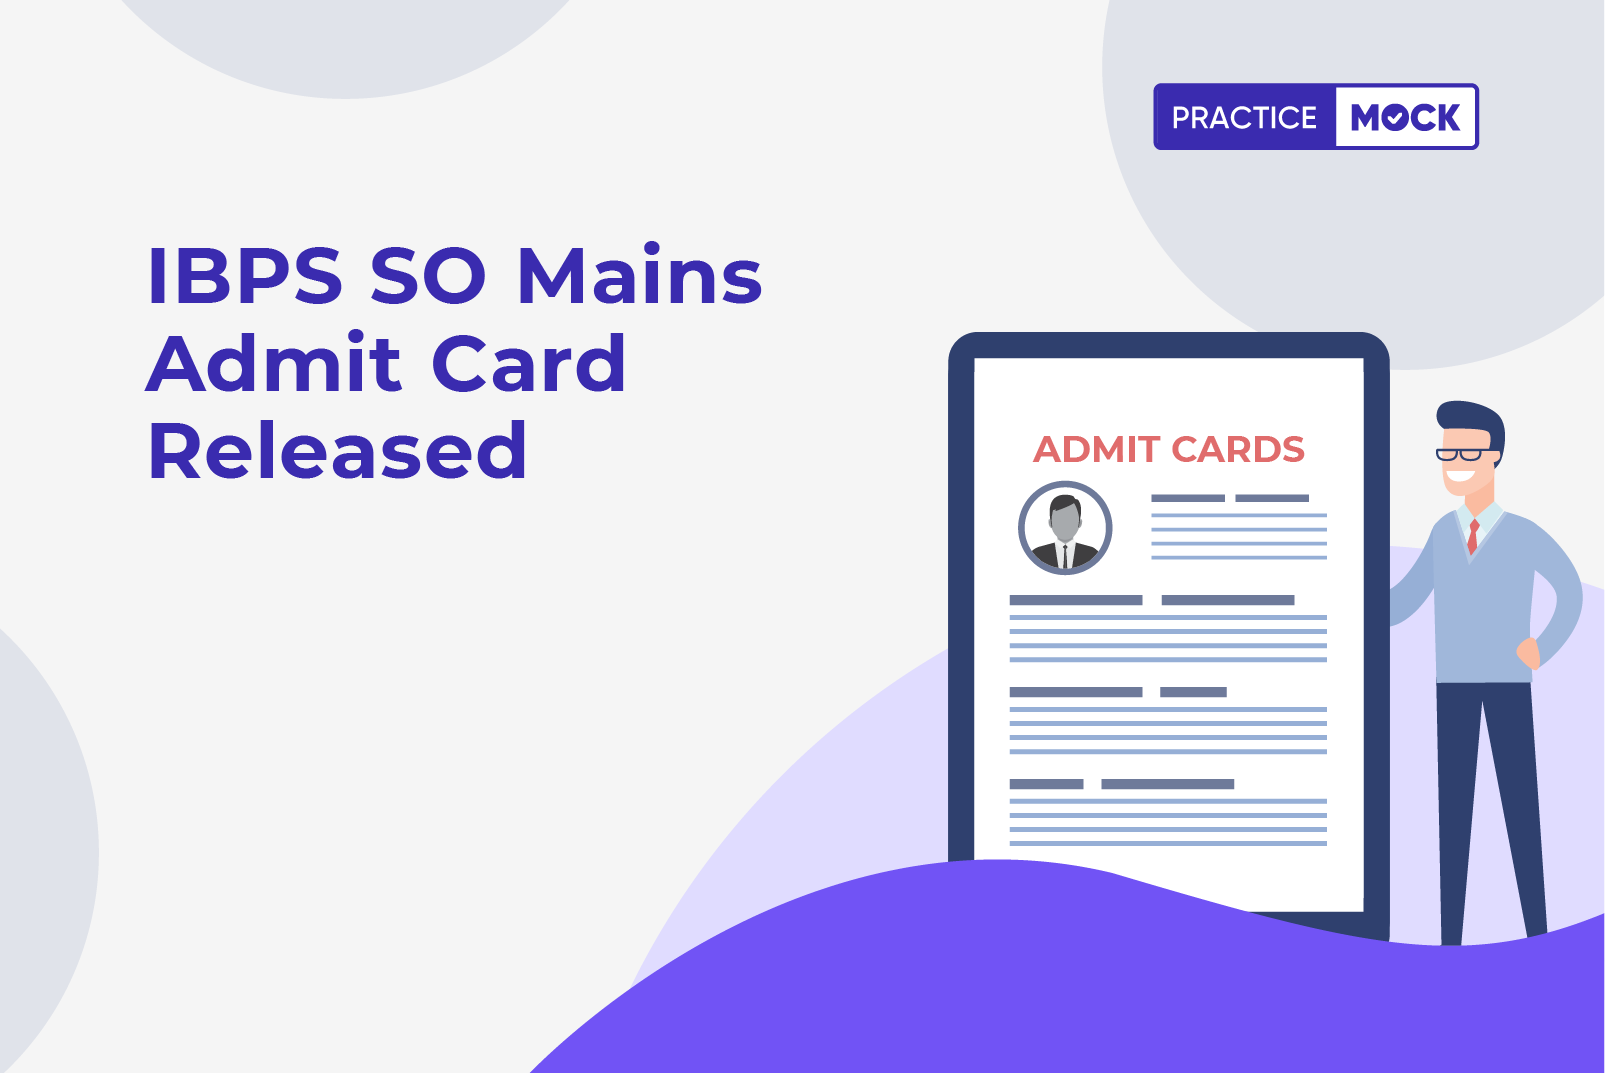 IBPS SO Mains Admit Card Released